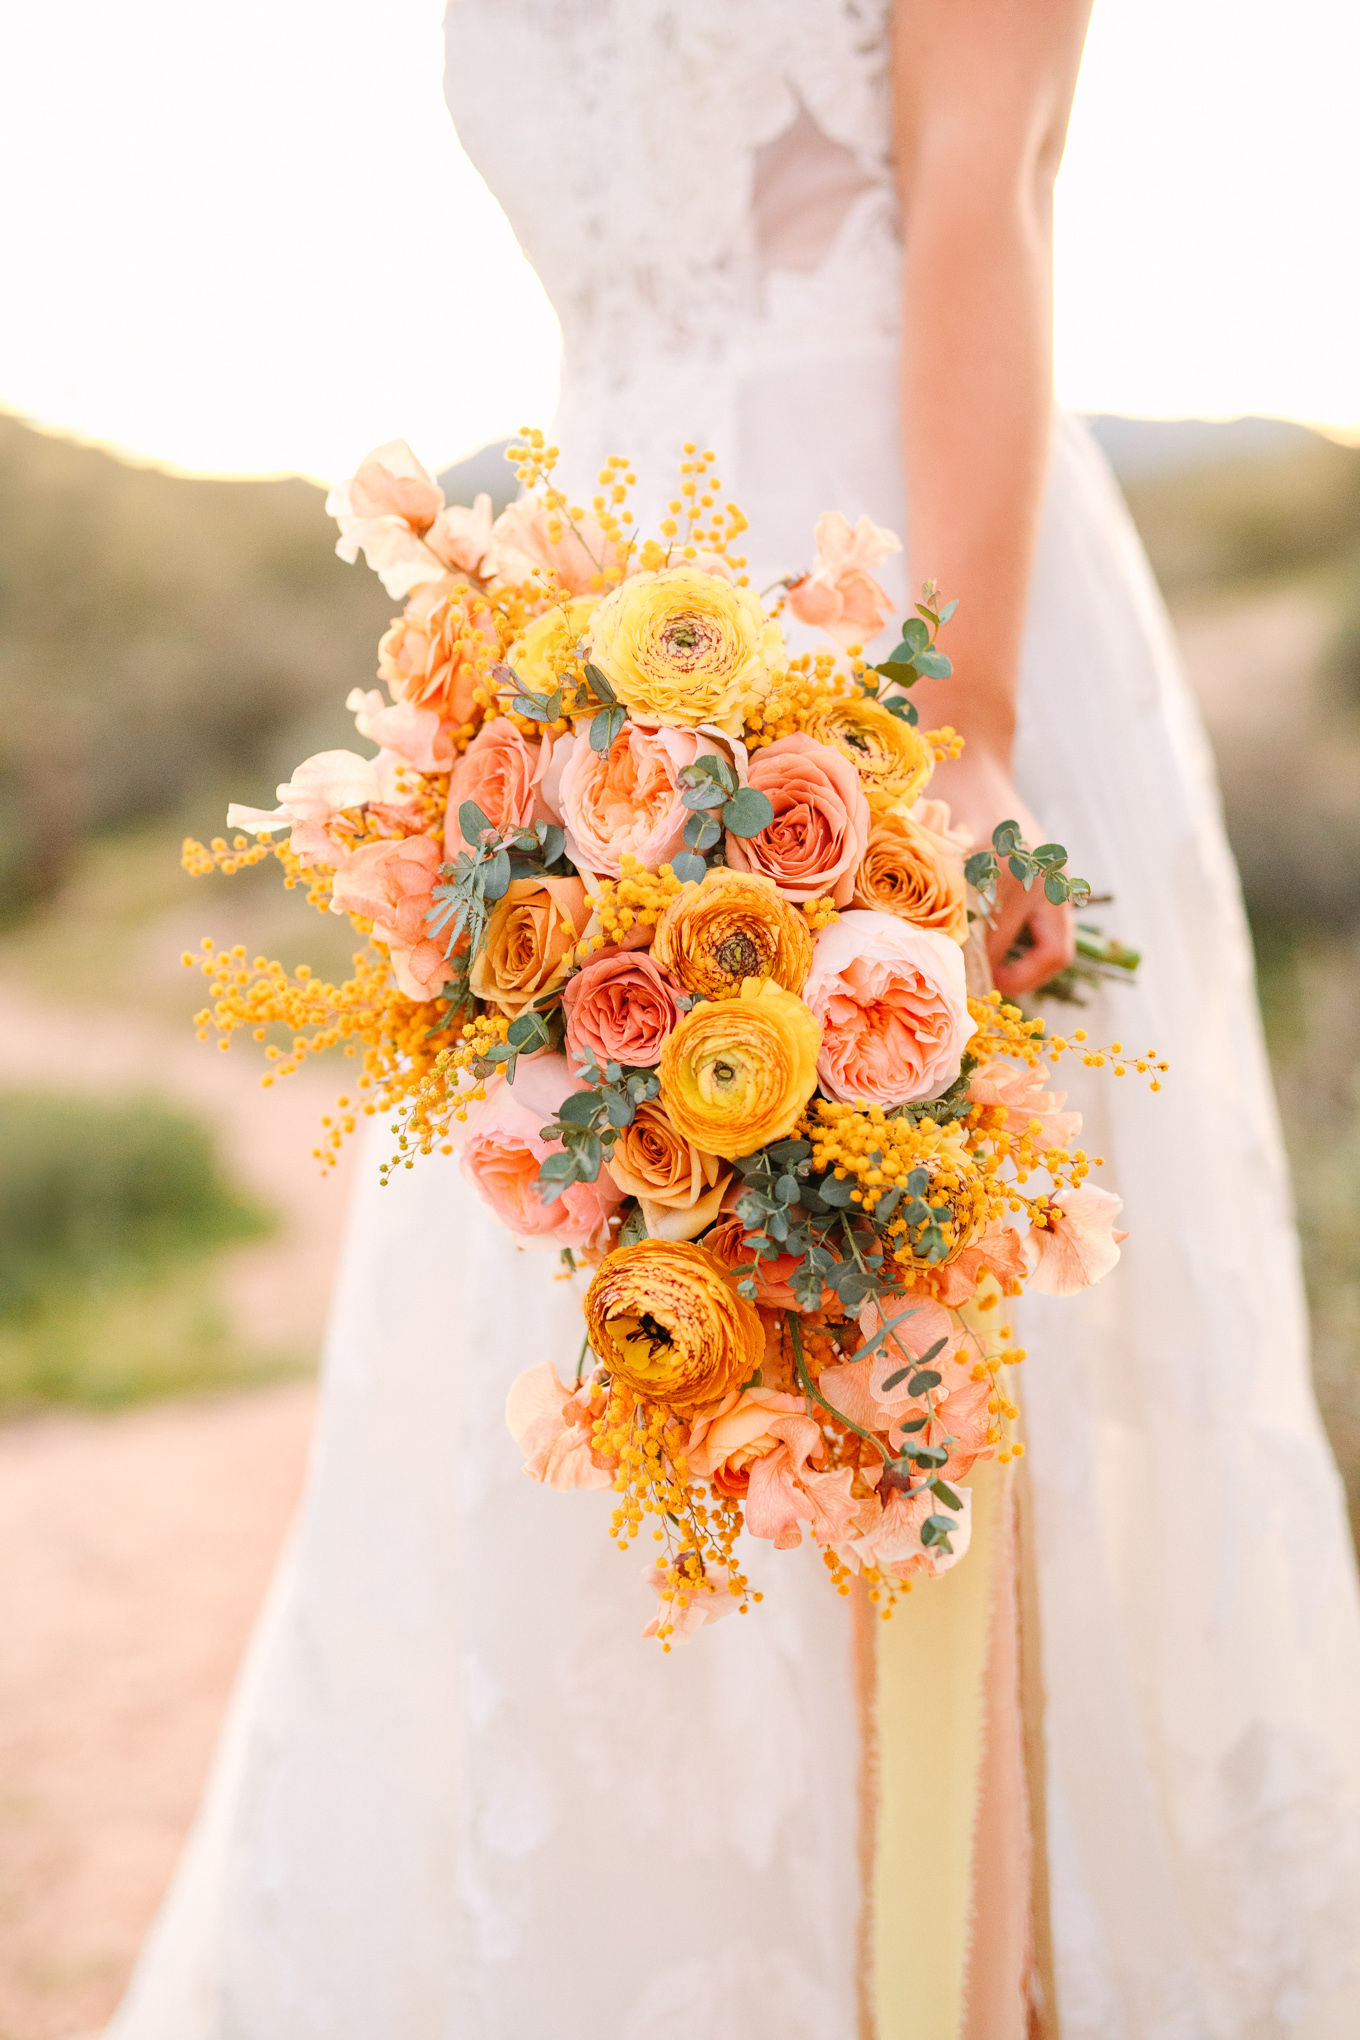 Mustard yellow and peach wedding bouquet | Beautiful bridal bouquet inspiration and advice | Colorful and elevated wedding photography for fun-loving couples in Southern California | #weddingflowers #weddingbouquet #bridebouquet #bouquetideas #uniquebouquet   Source: Mary Costa Photography | Los Angeles 